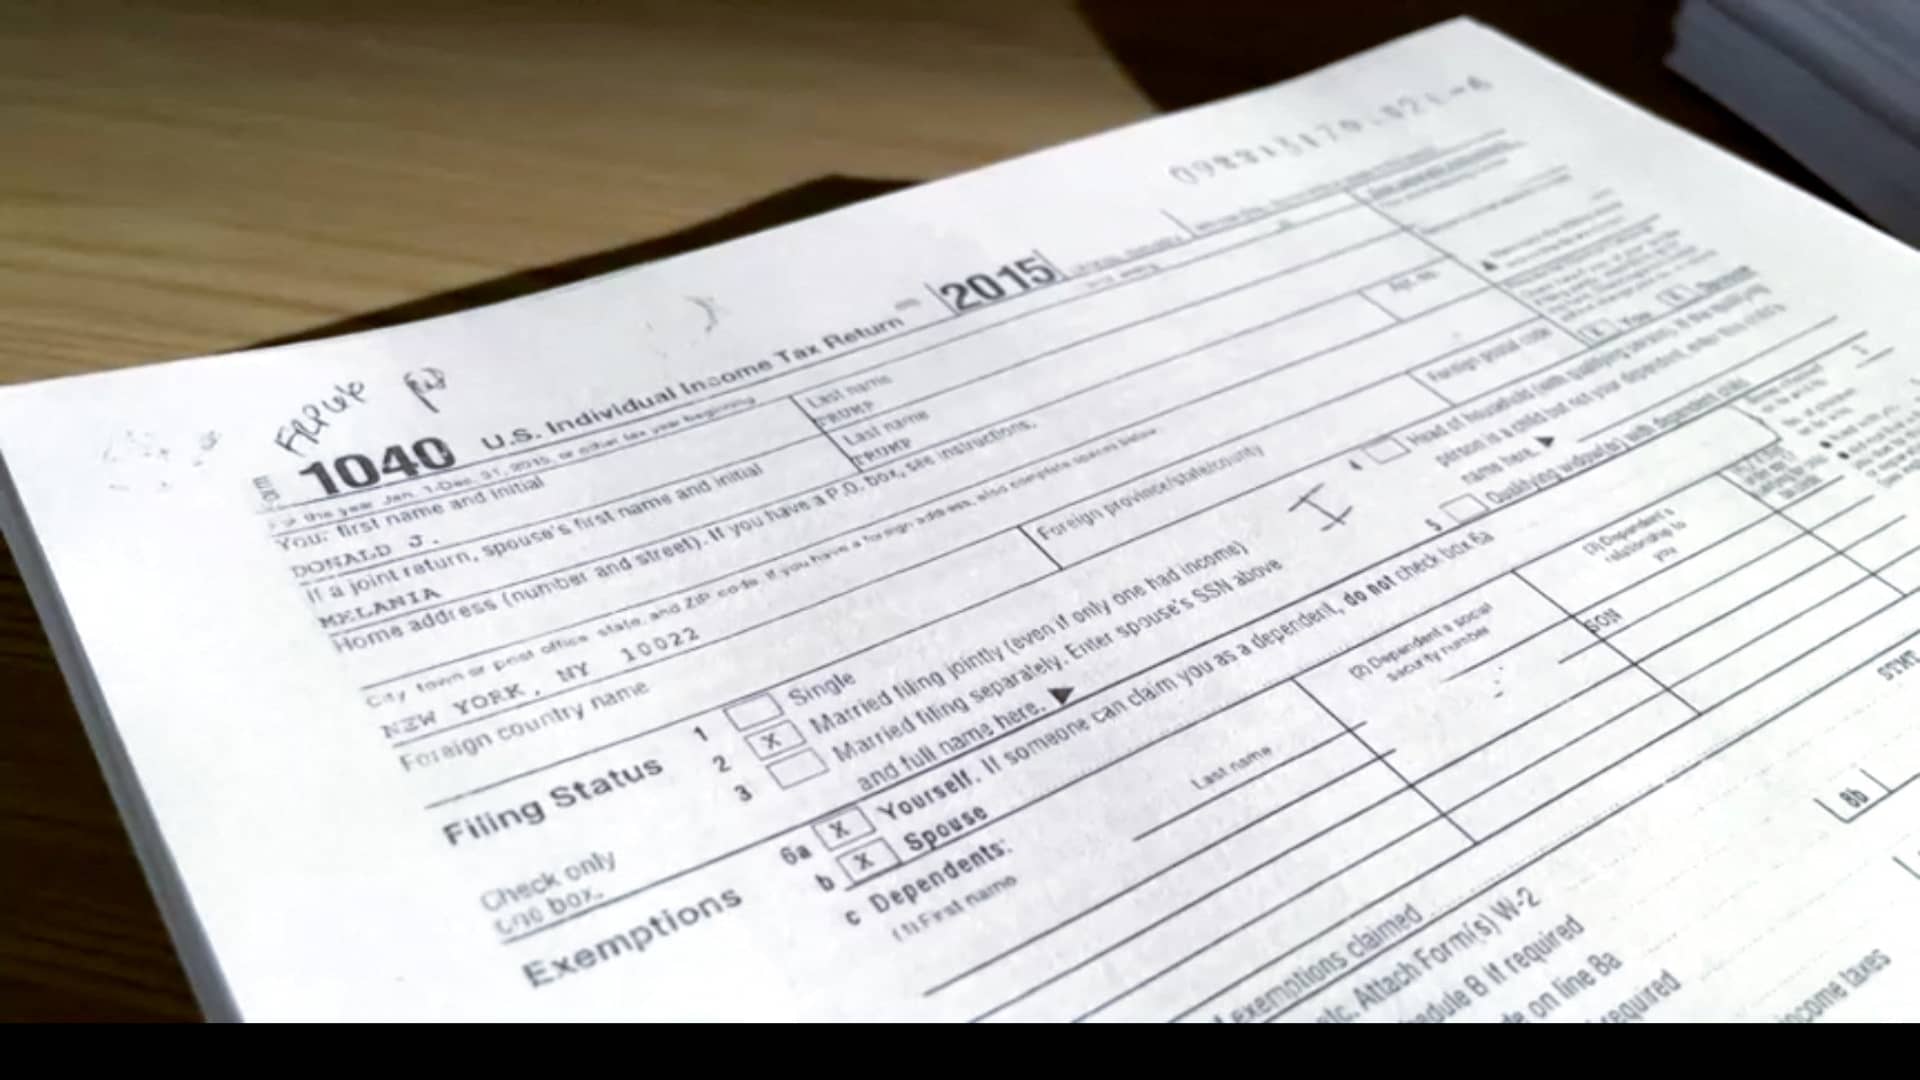 A copy of former U.S. President Donald Trump's 2015 individual tax return is seen after Trump's tax returns, obtained late last month after a long court fight, were made public by the U.S. House Ways and Means Committee in Washington, U.S., December 30, 2022. 